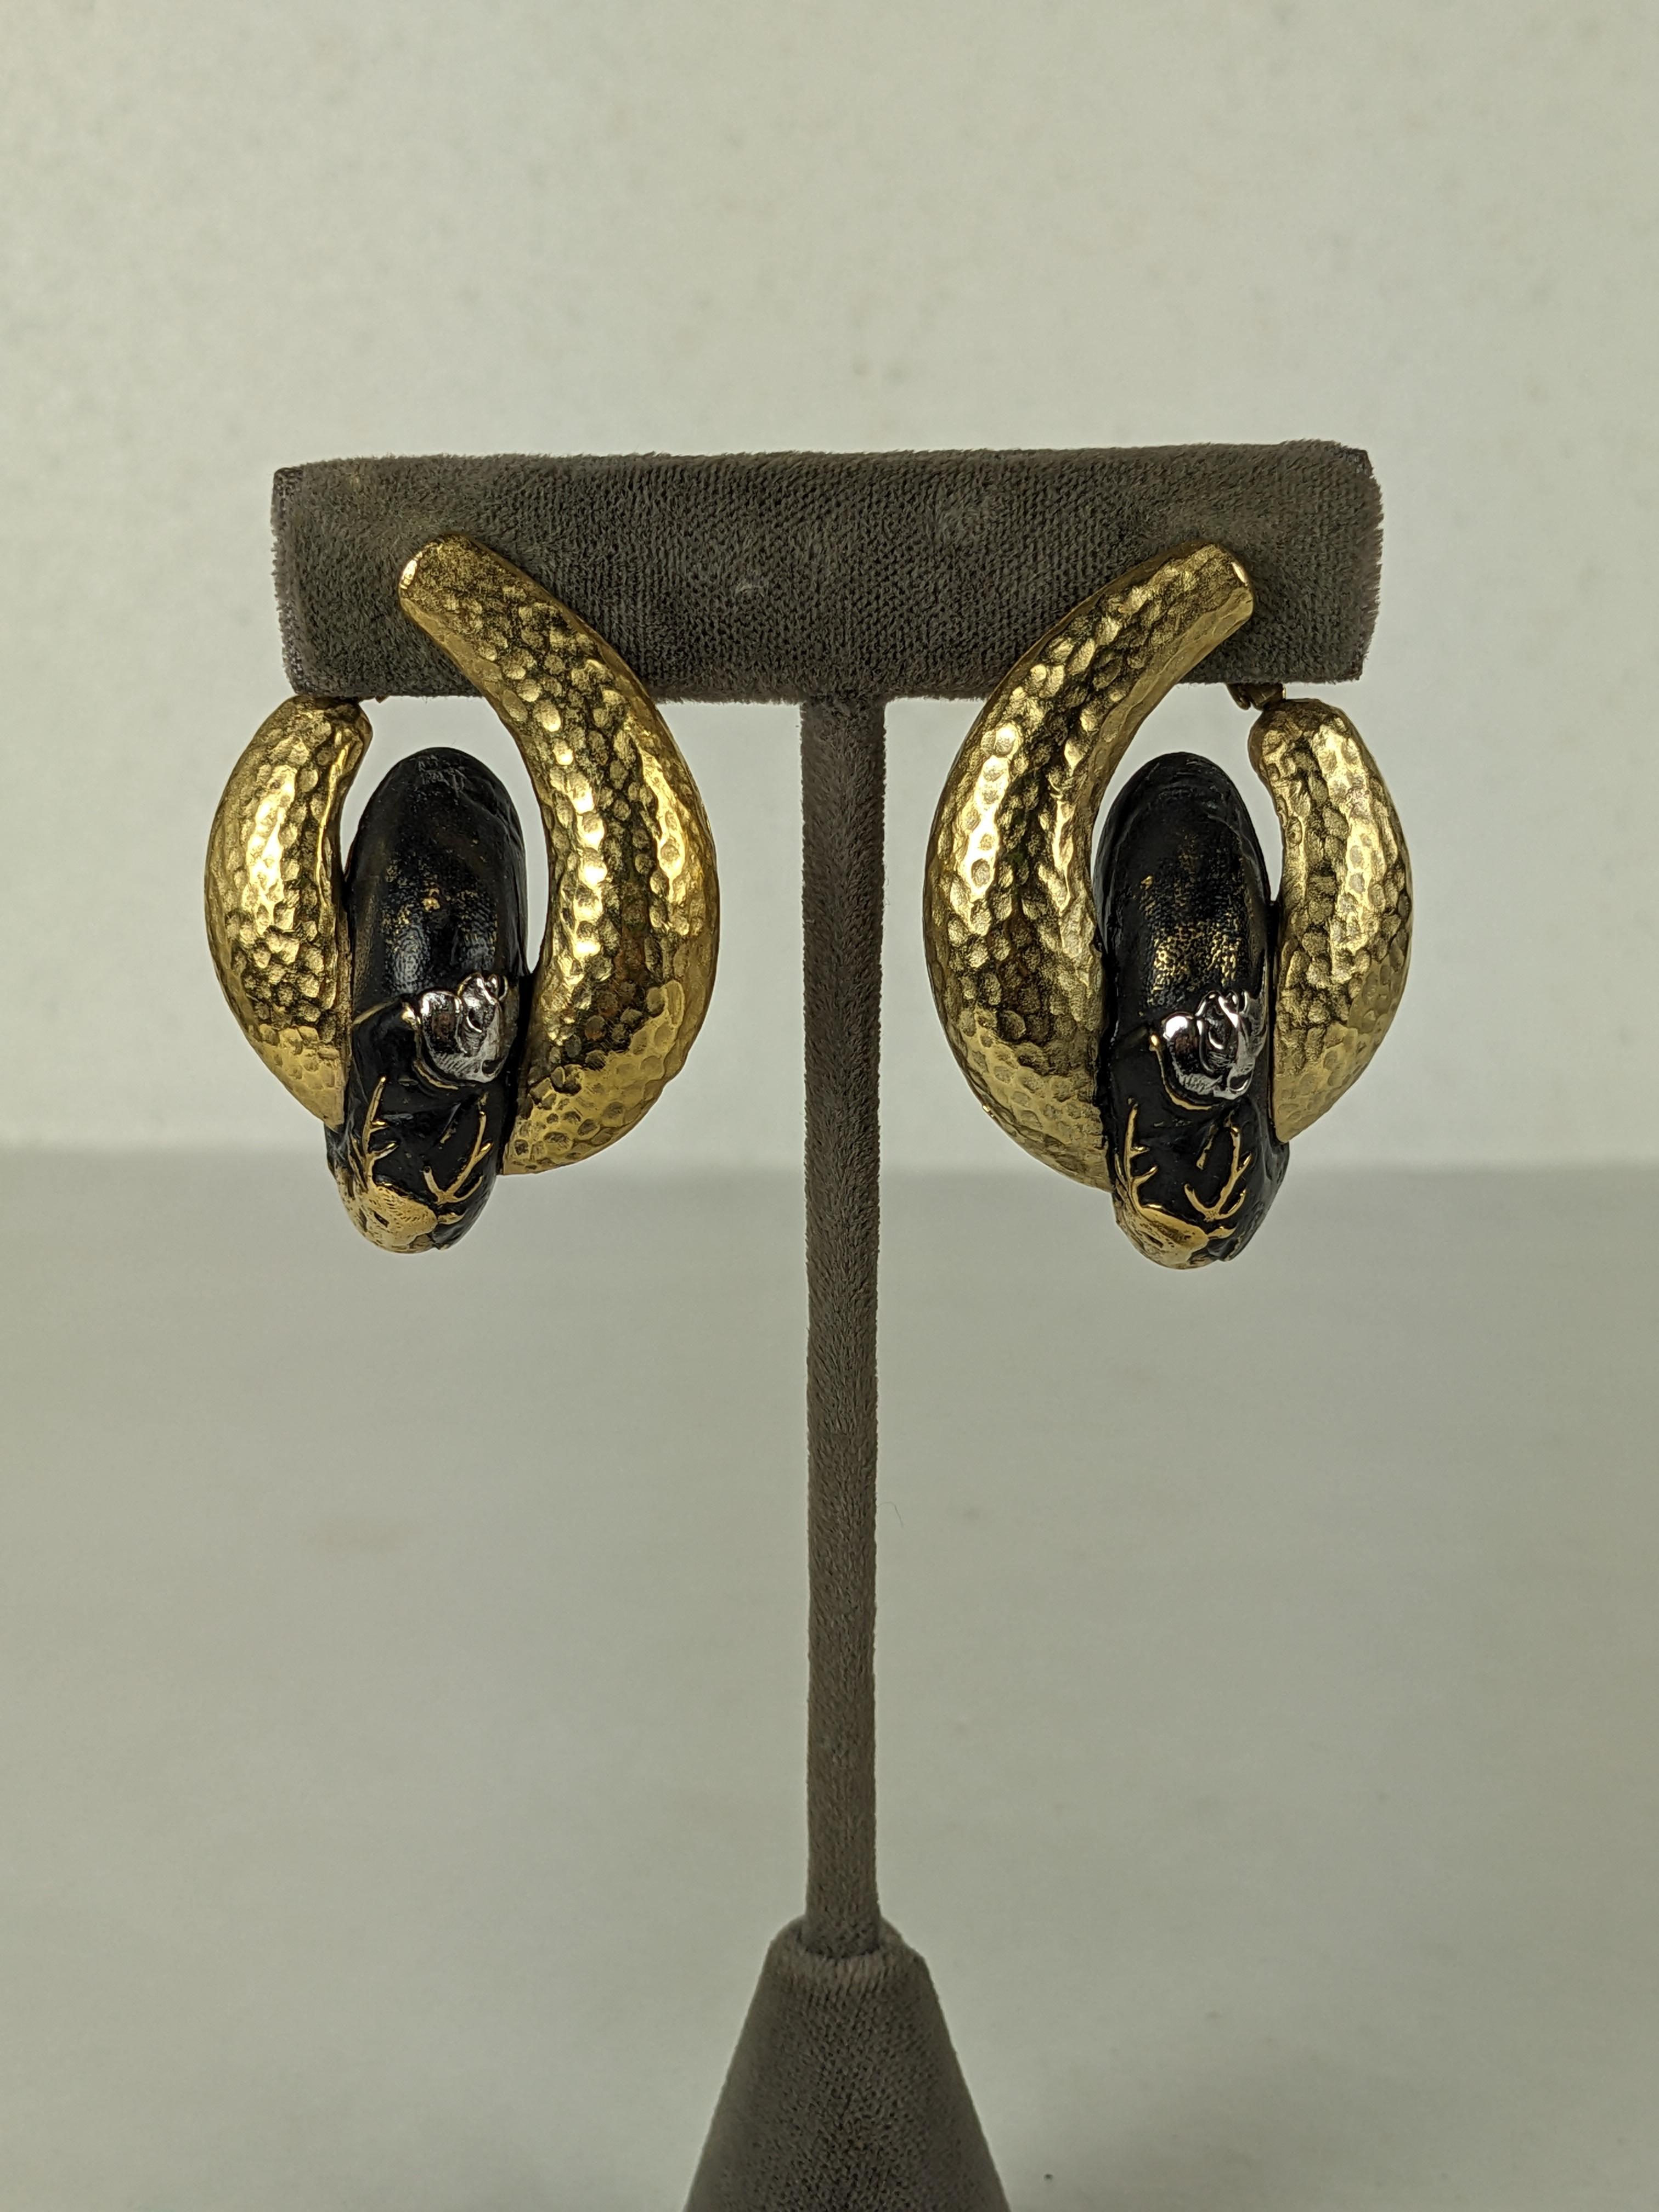 Striking Diane Love for Trifari Shakudo Style Earrings from the 1970's. Shakudo mixed metal designs paired with hammered gold finish metal. Clip fittings, 2